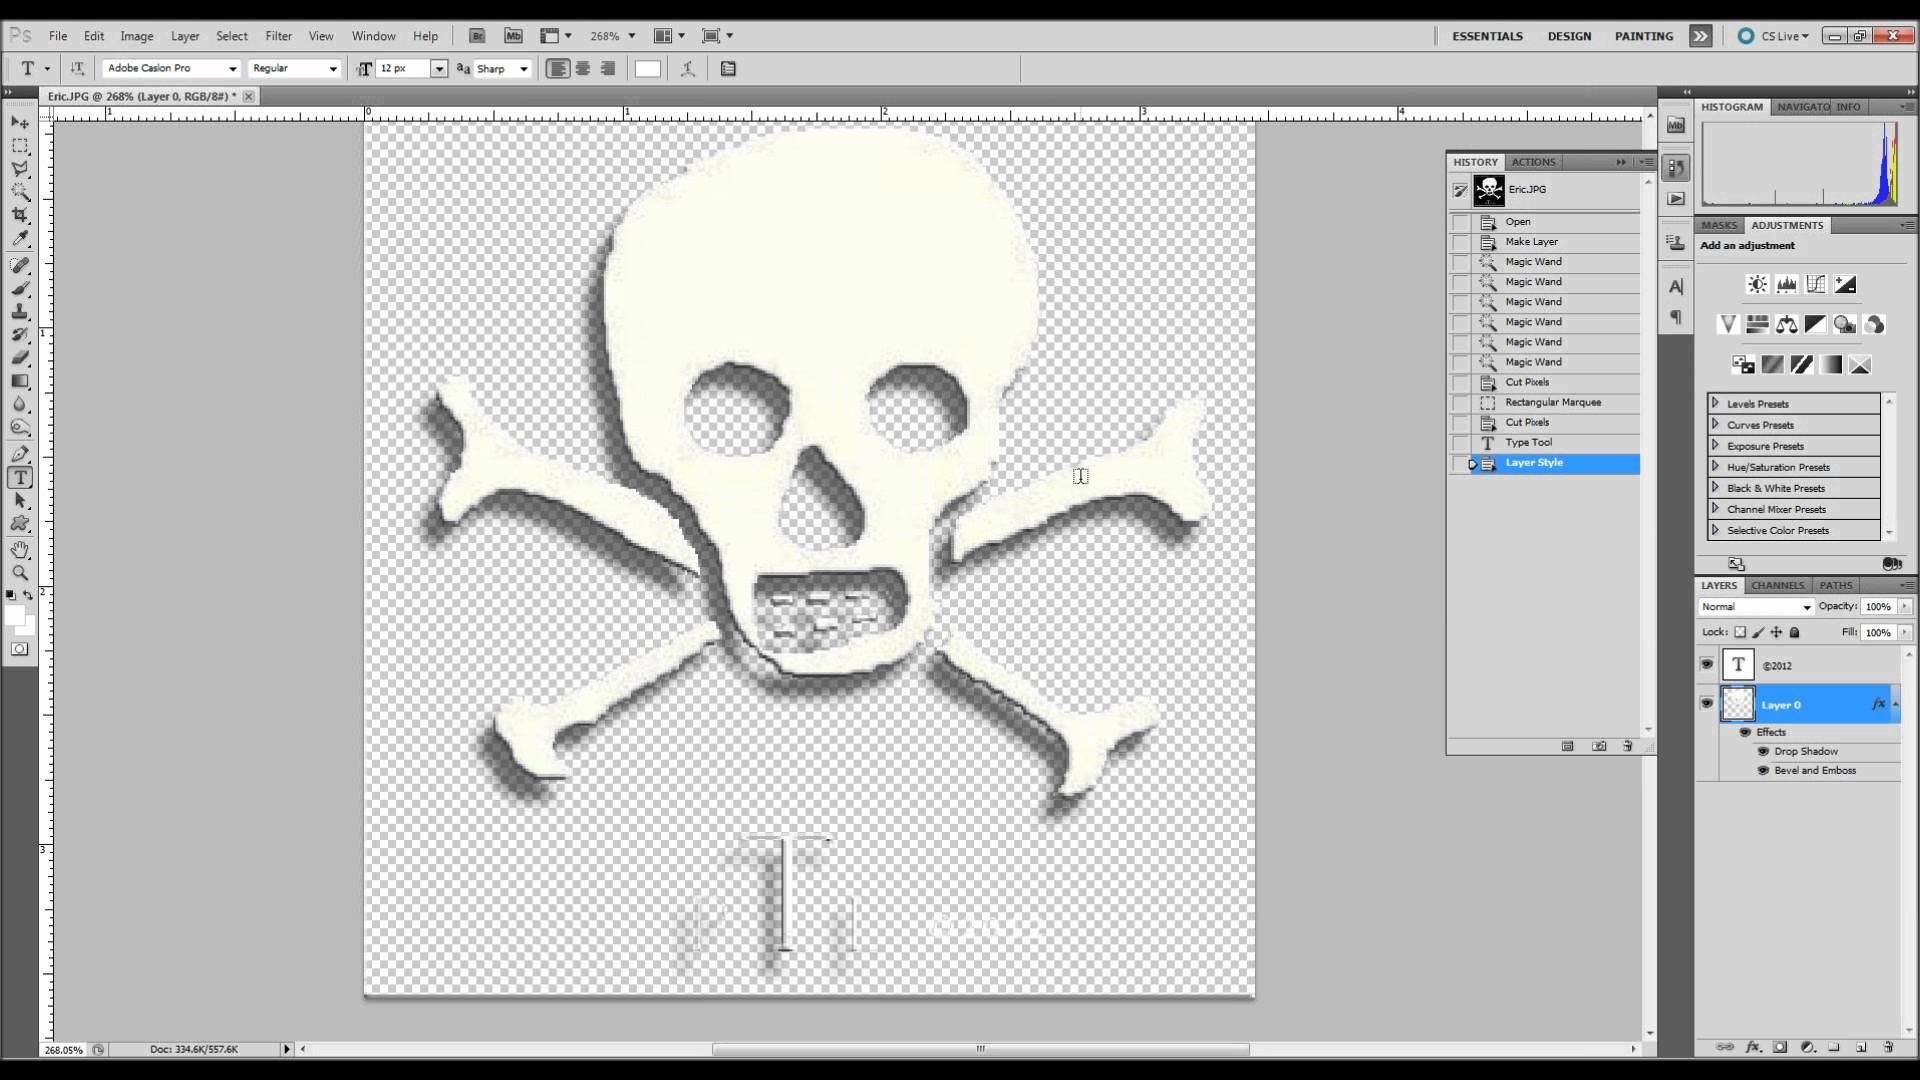     Clip Art With A Transparent Background In Adobe Photoshop Cs5